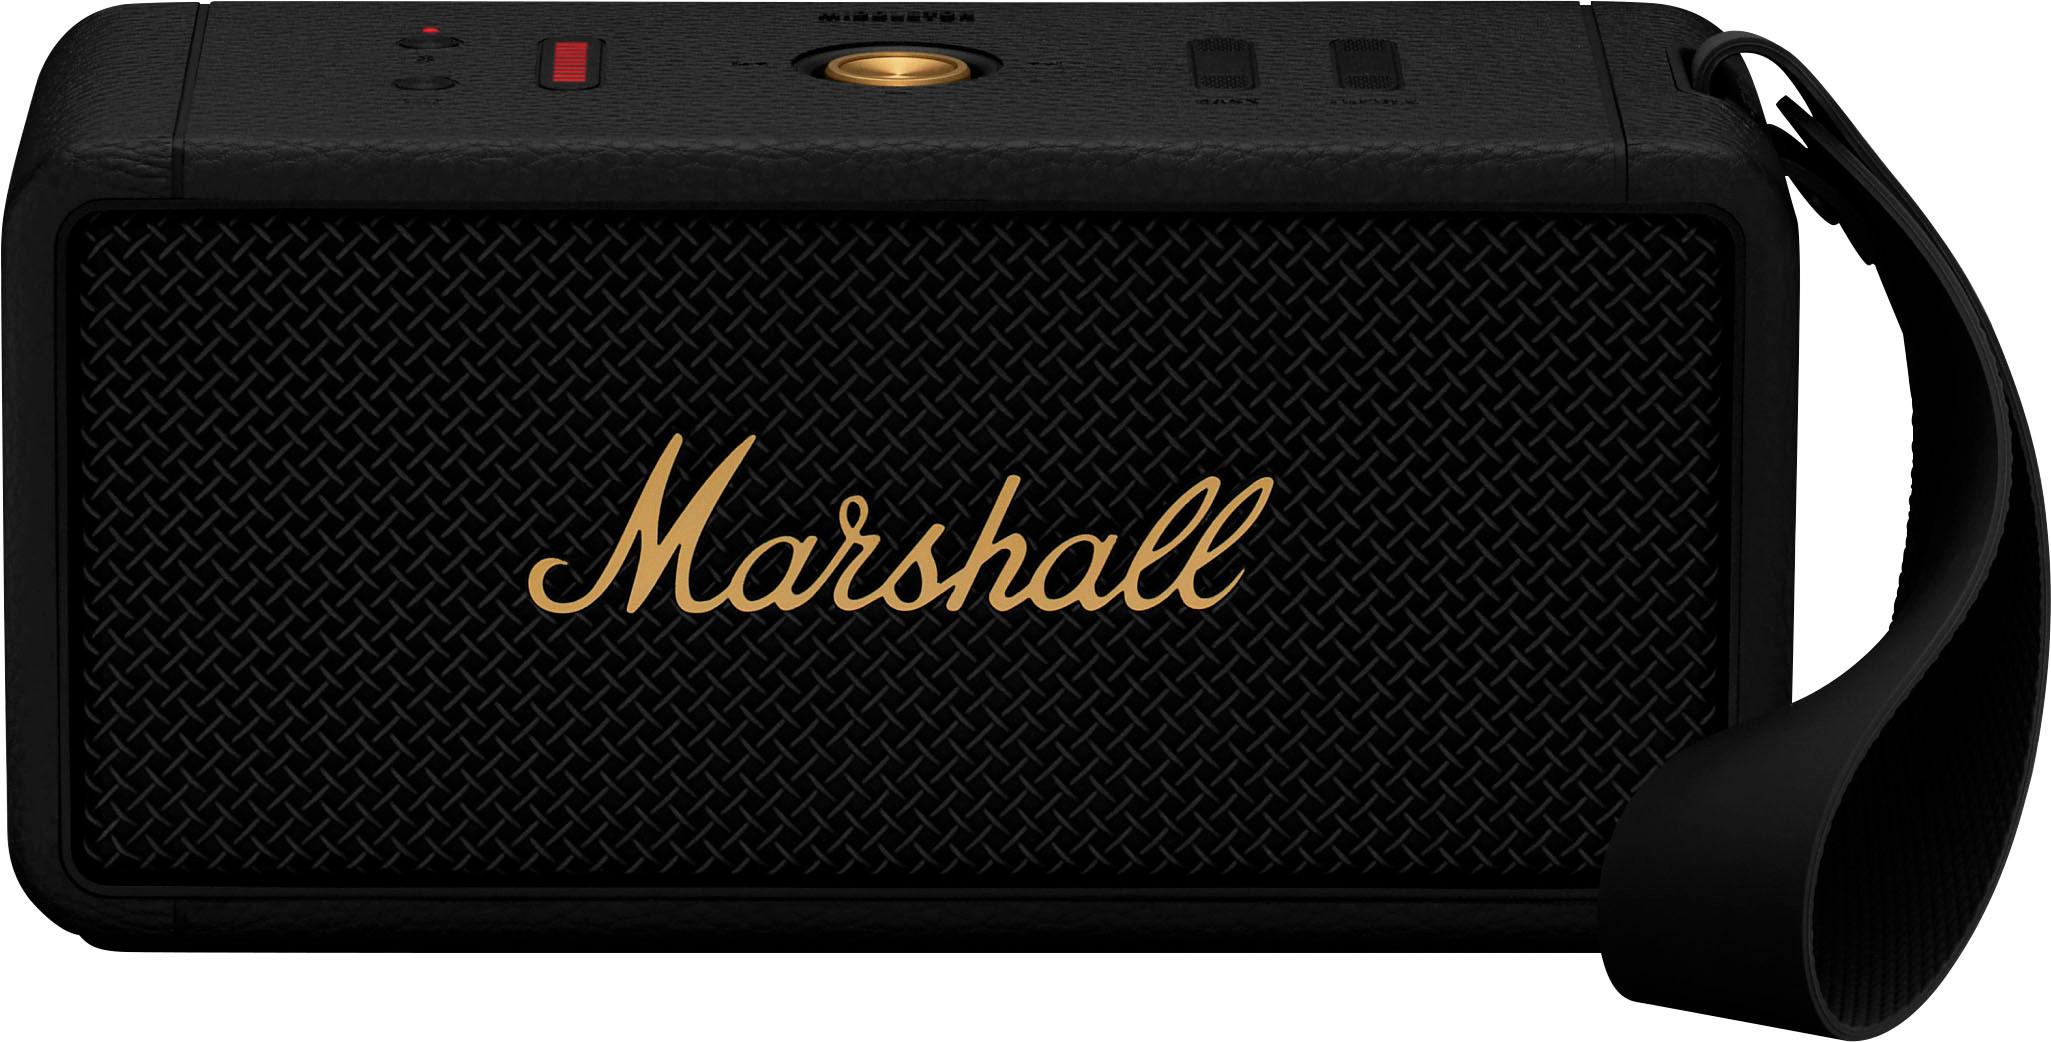 The Marshall Middleton lets you party anywhere — Aaron x Loud and